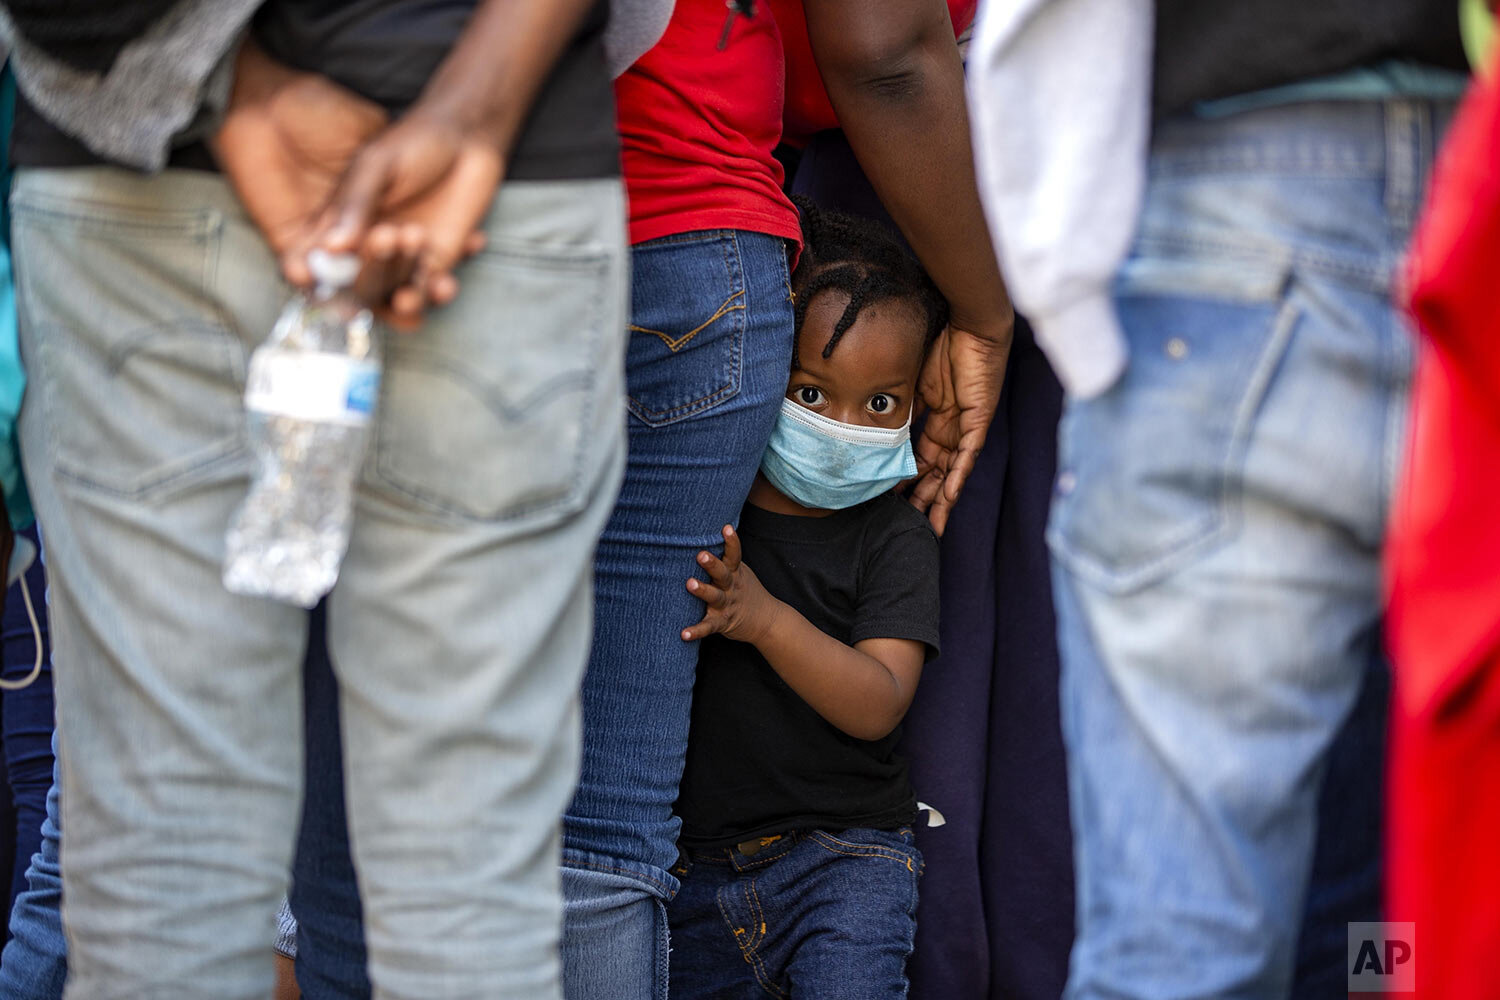  A child looks at the camera as Haitians who were deported from the U.S. line up at a hotel where they will be quarantined as a measure against the spread of the new coronavirus in Tabarre, Haiti, Thursday, April 23, 2020. (AP Photo/Dieu Nalio Chery)